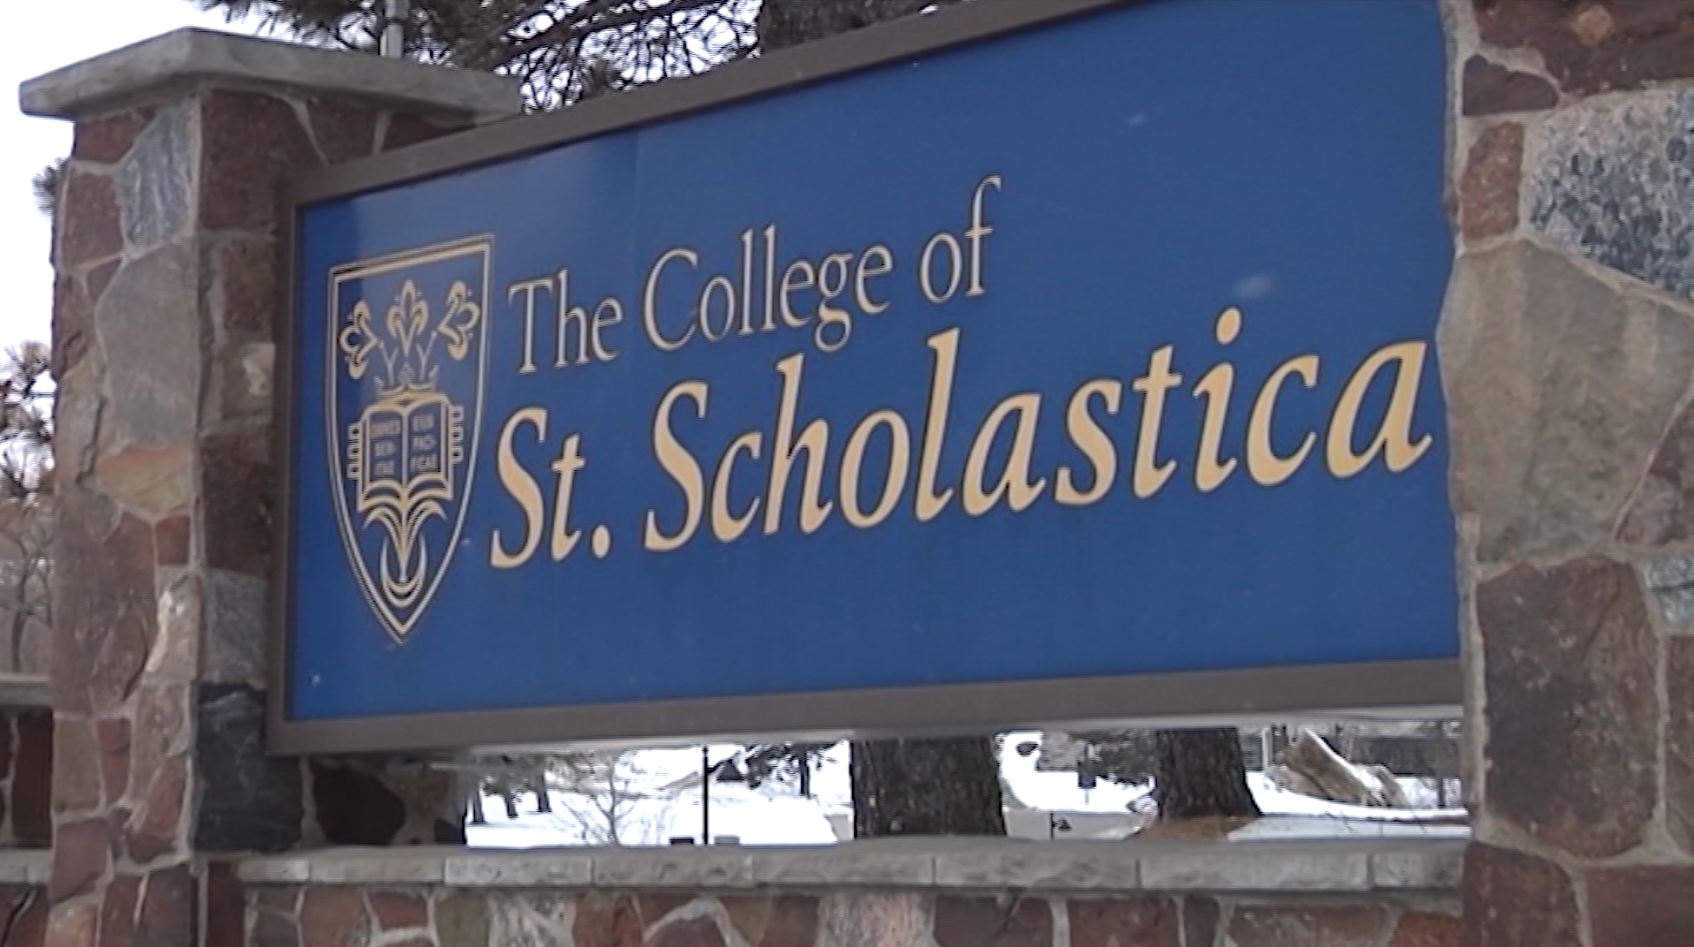 The College of St. Scholastica sign